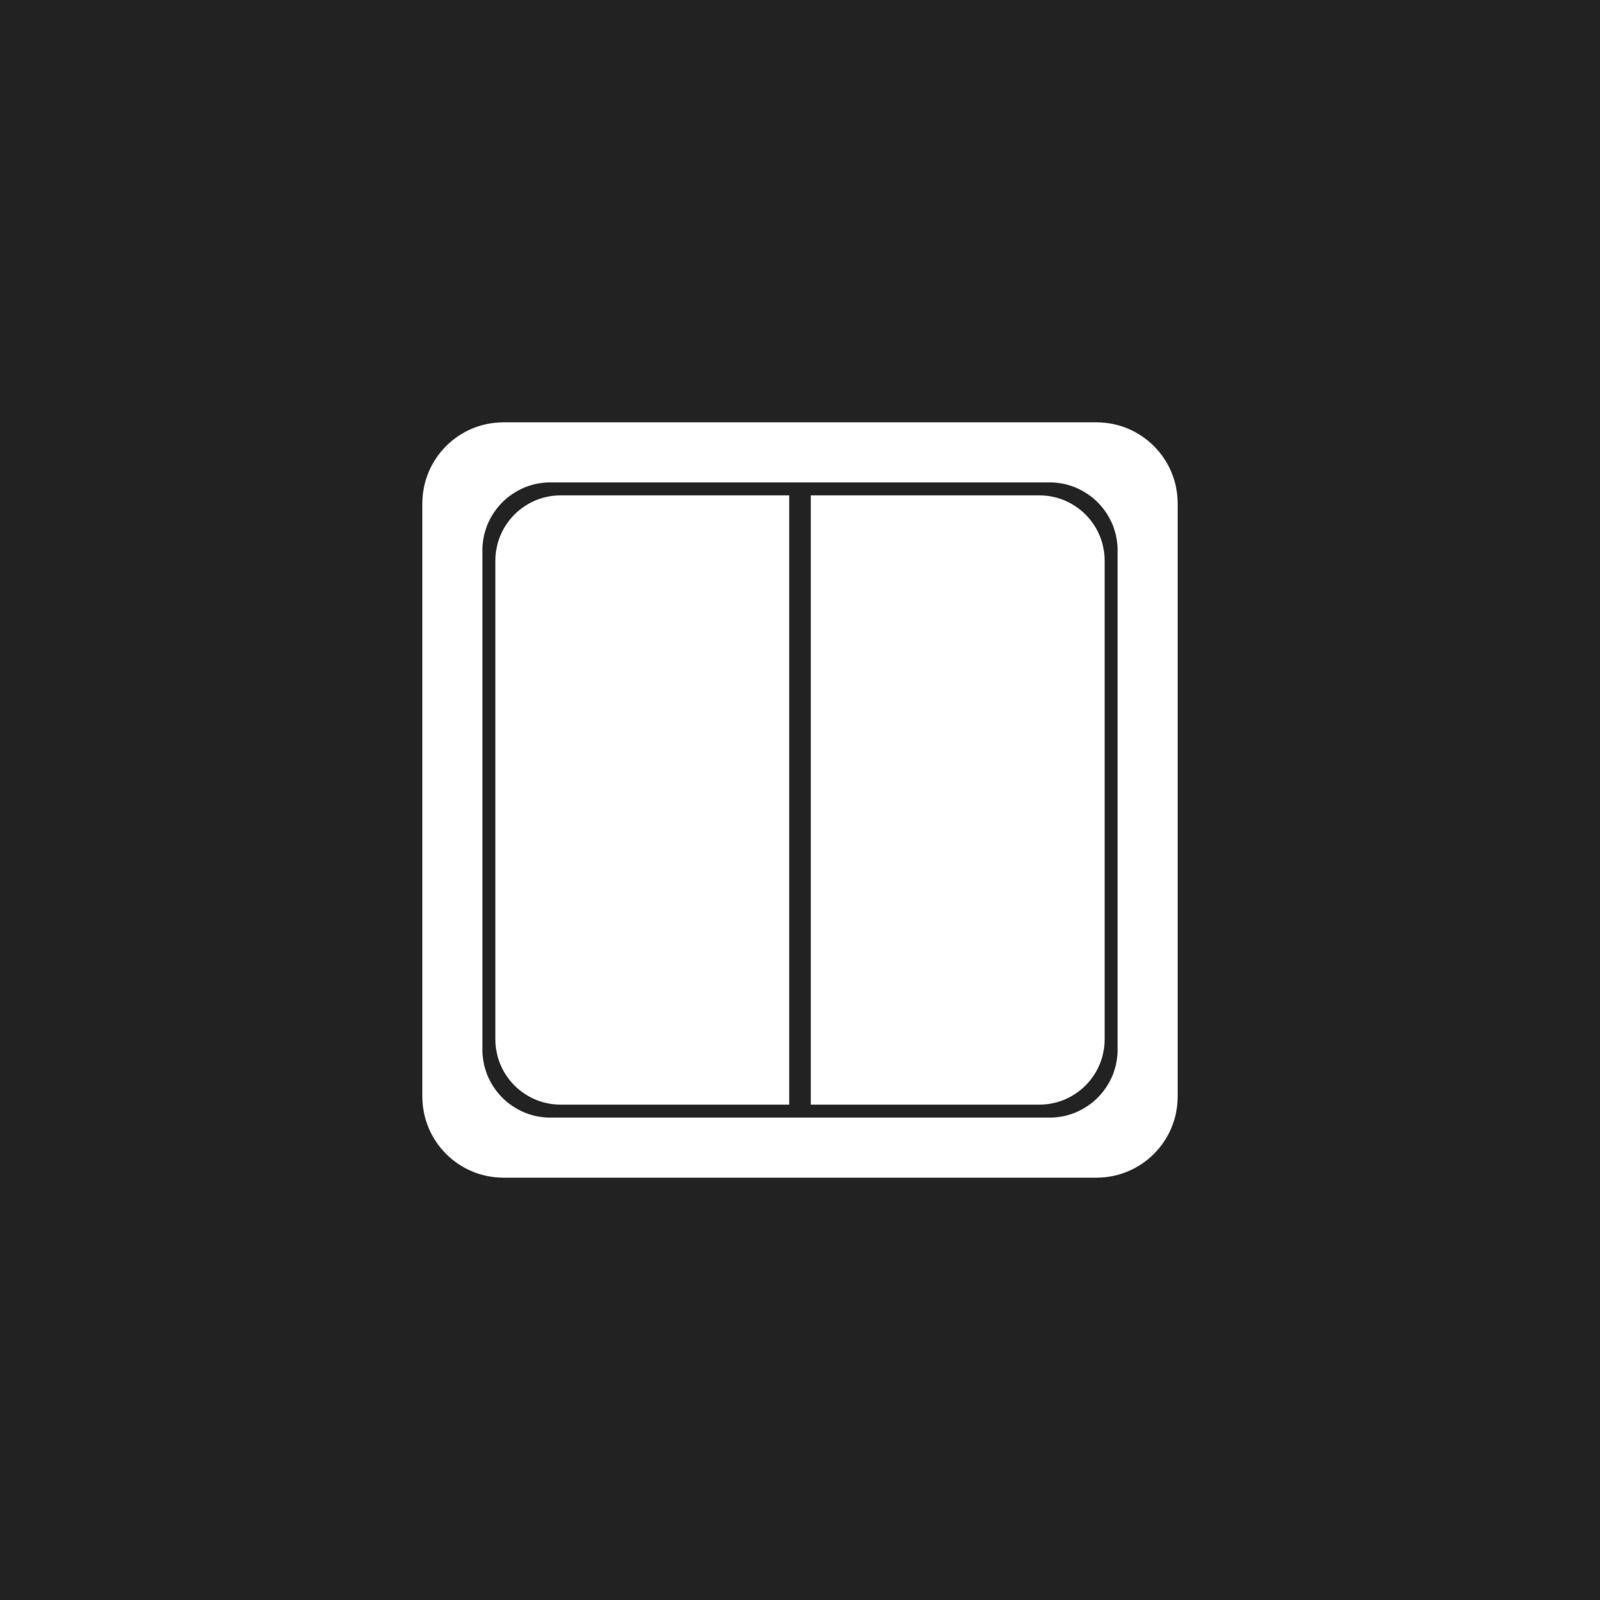 Electric light switch icon. Electric switch flat vector illustration on black background.